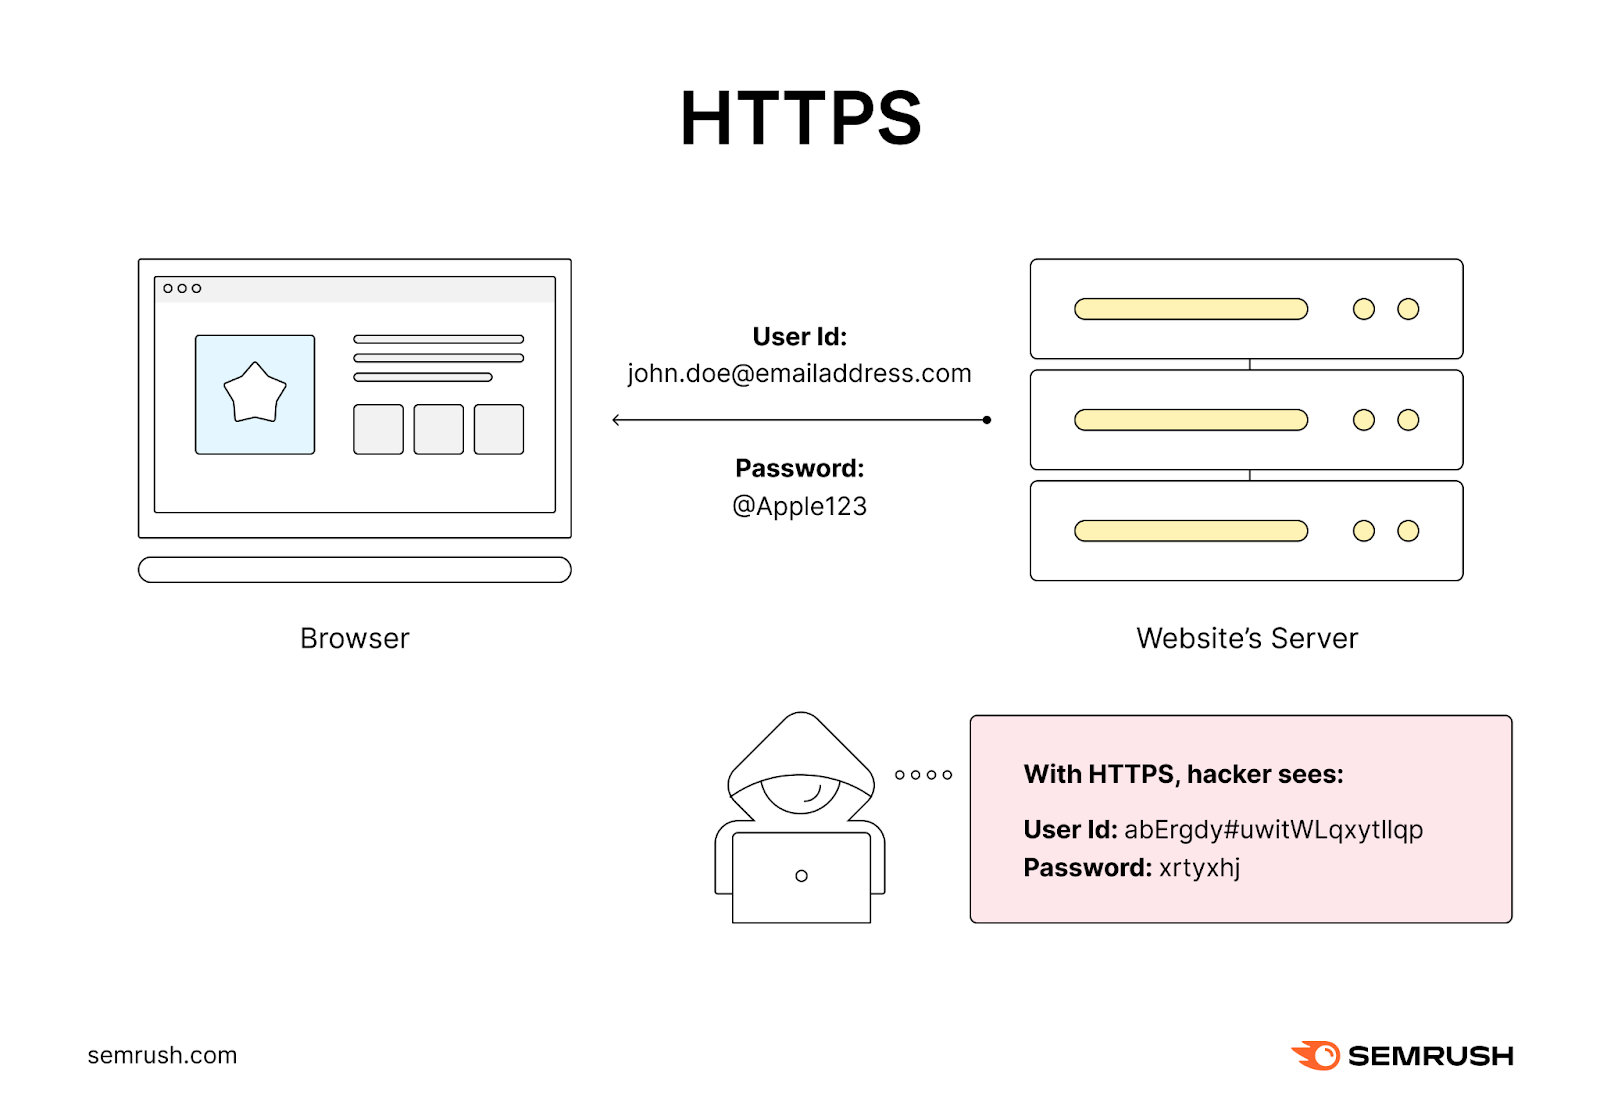 An illustration showing how HTTPS works, with data being encrypted